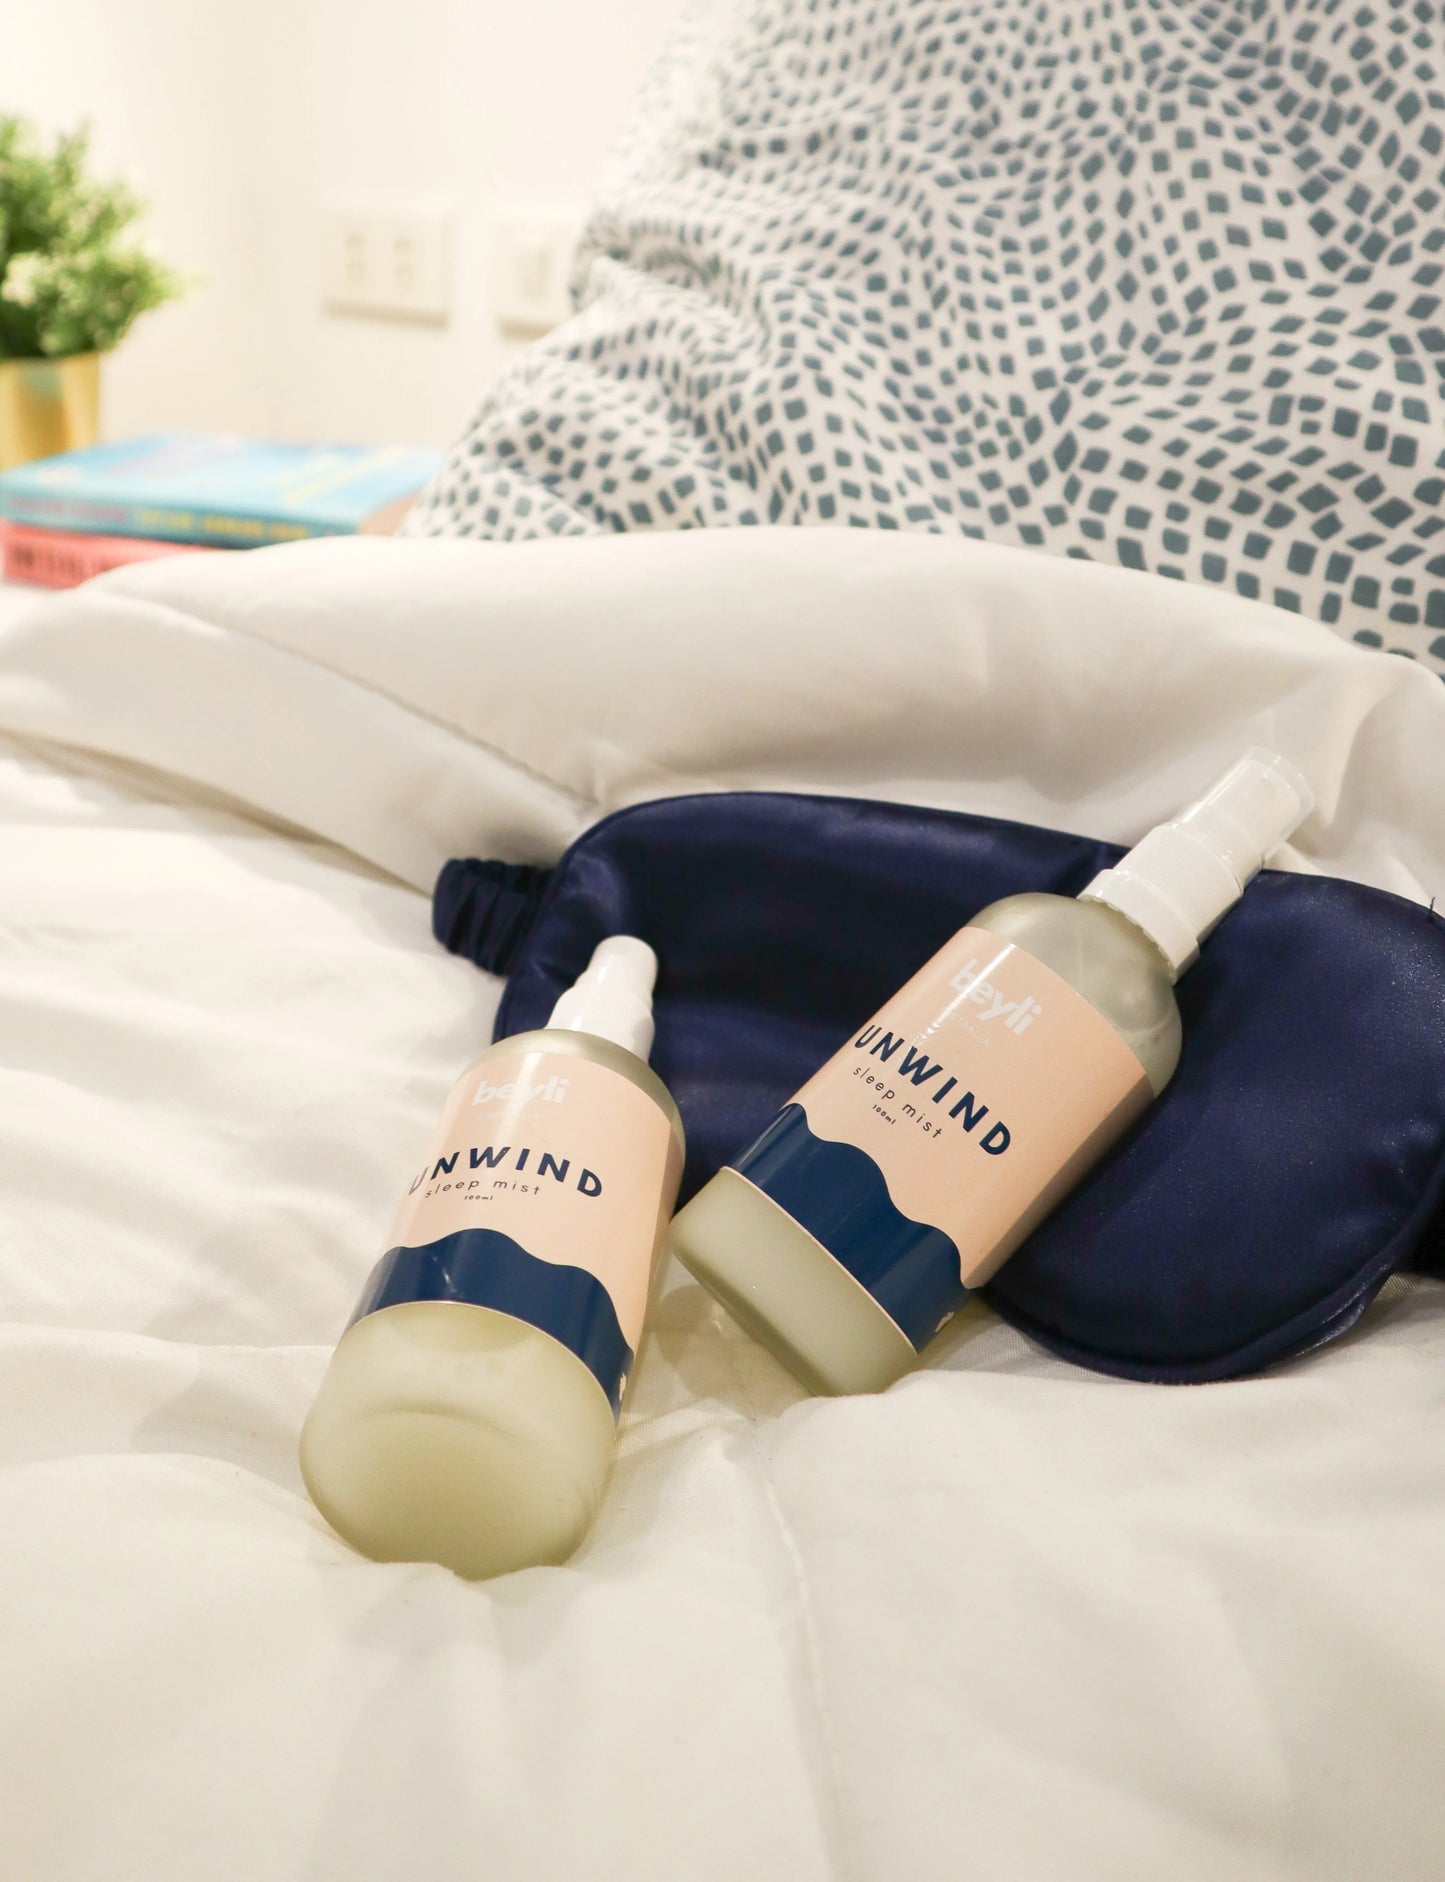 Sleep Bundle Essentials lotion pair with tote bag arranged on a bed